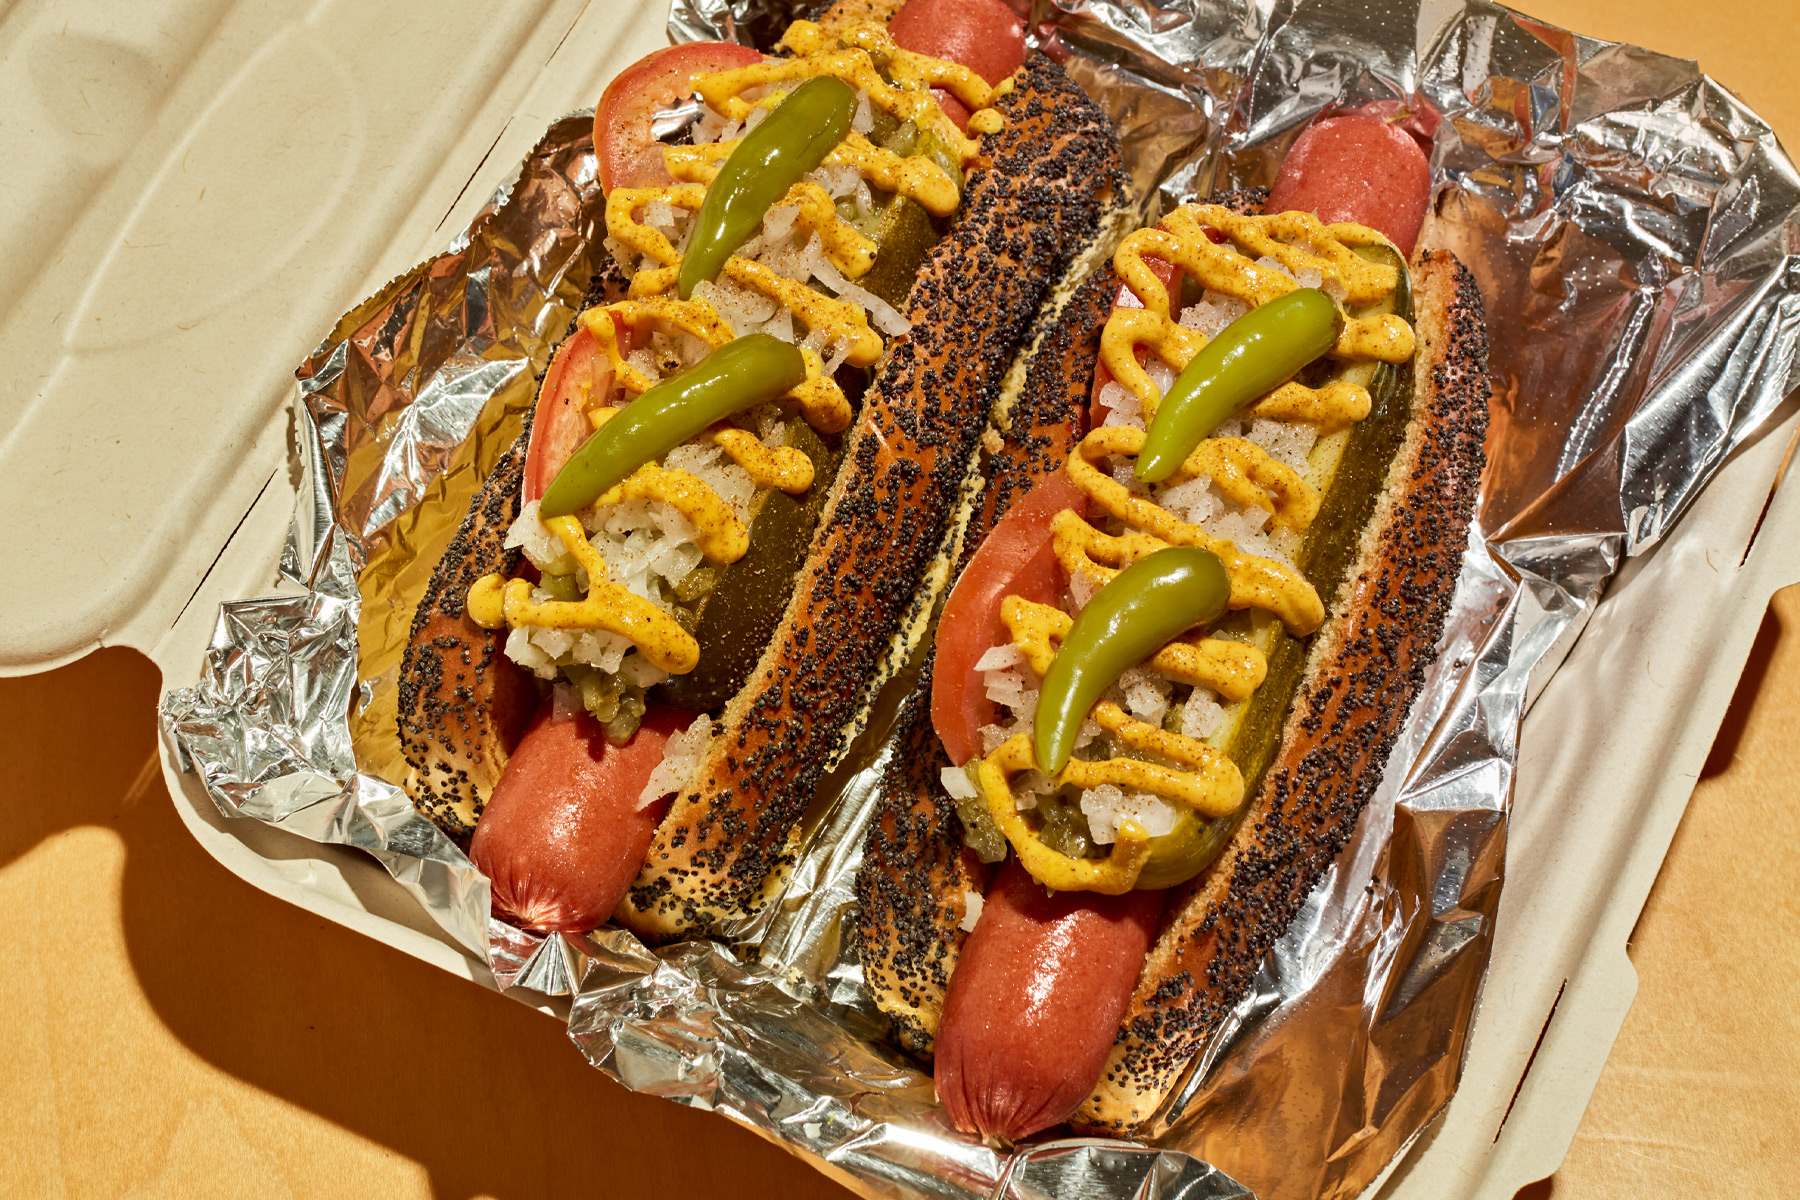 3 Classic Hot Dog Toppings - Lost in Food - oggsync.com